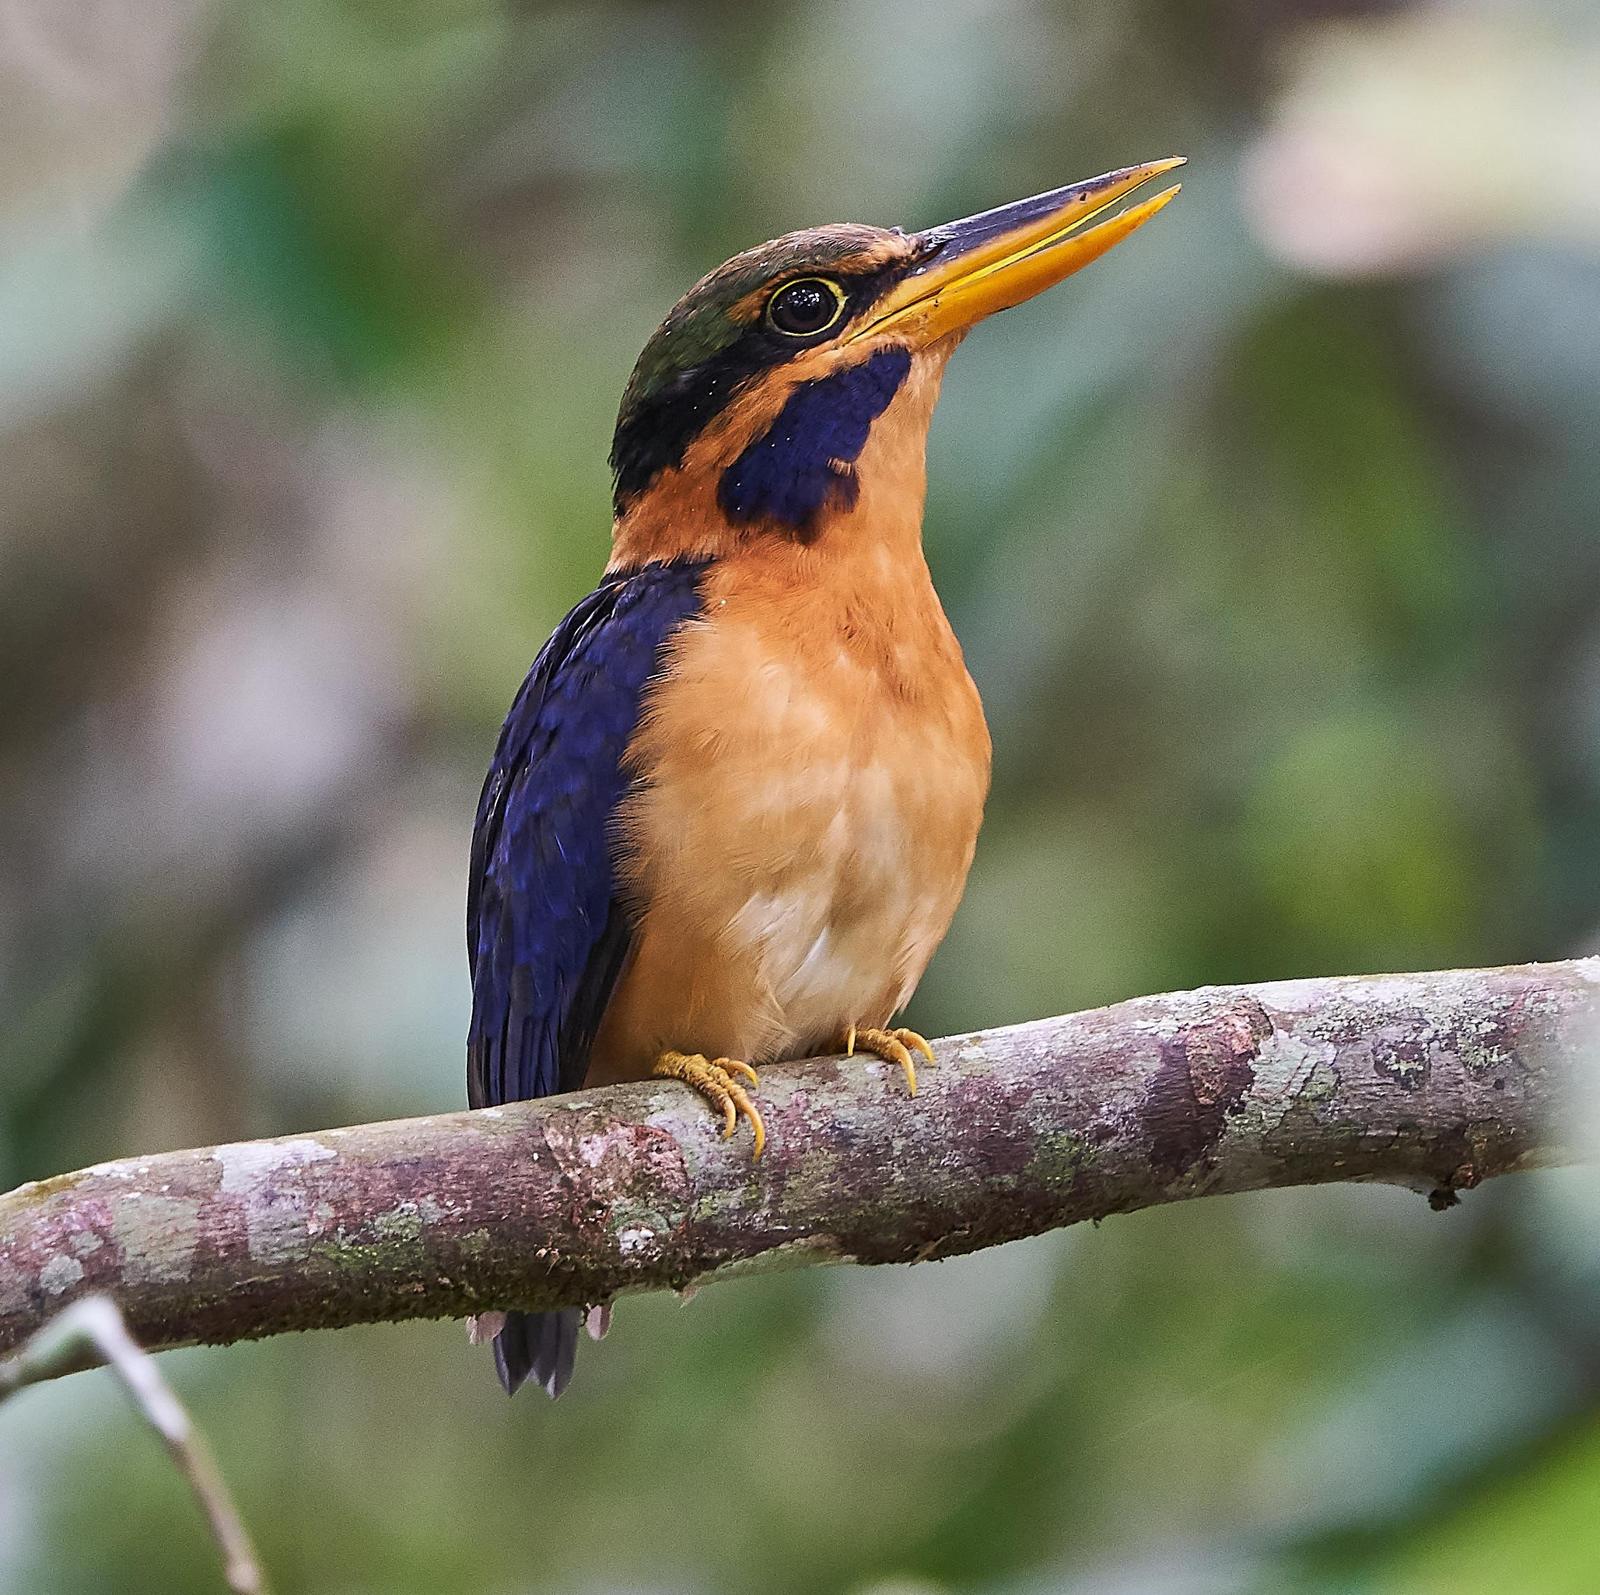 Rufous-collared Kingfisher Photo by Steven Cheong